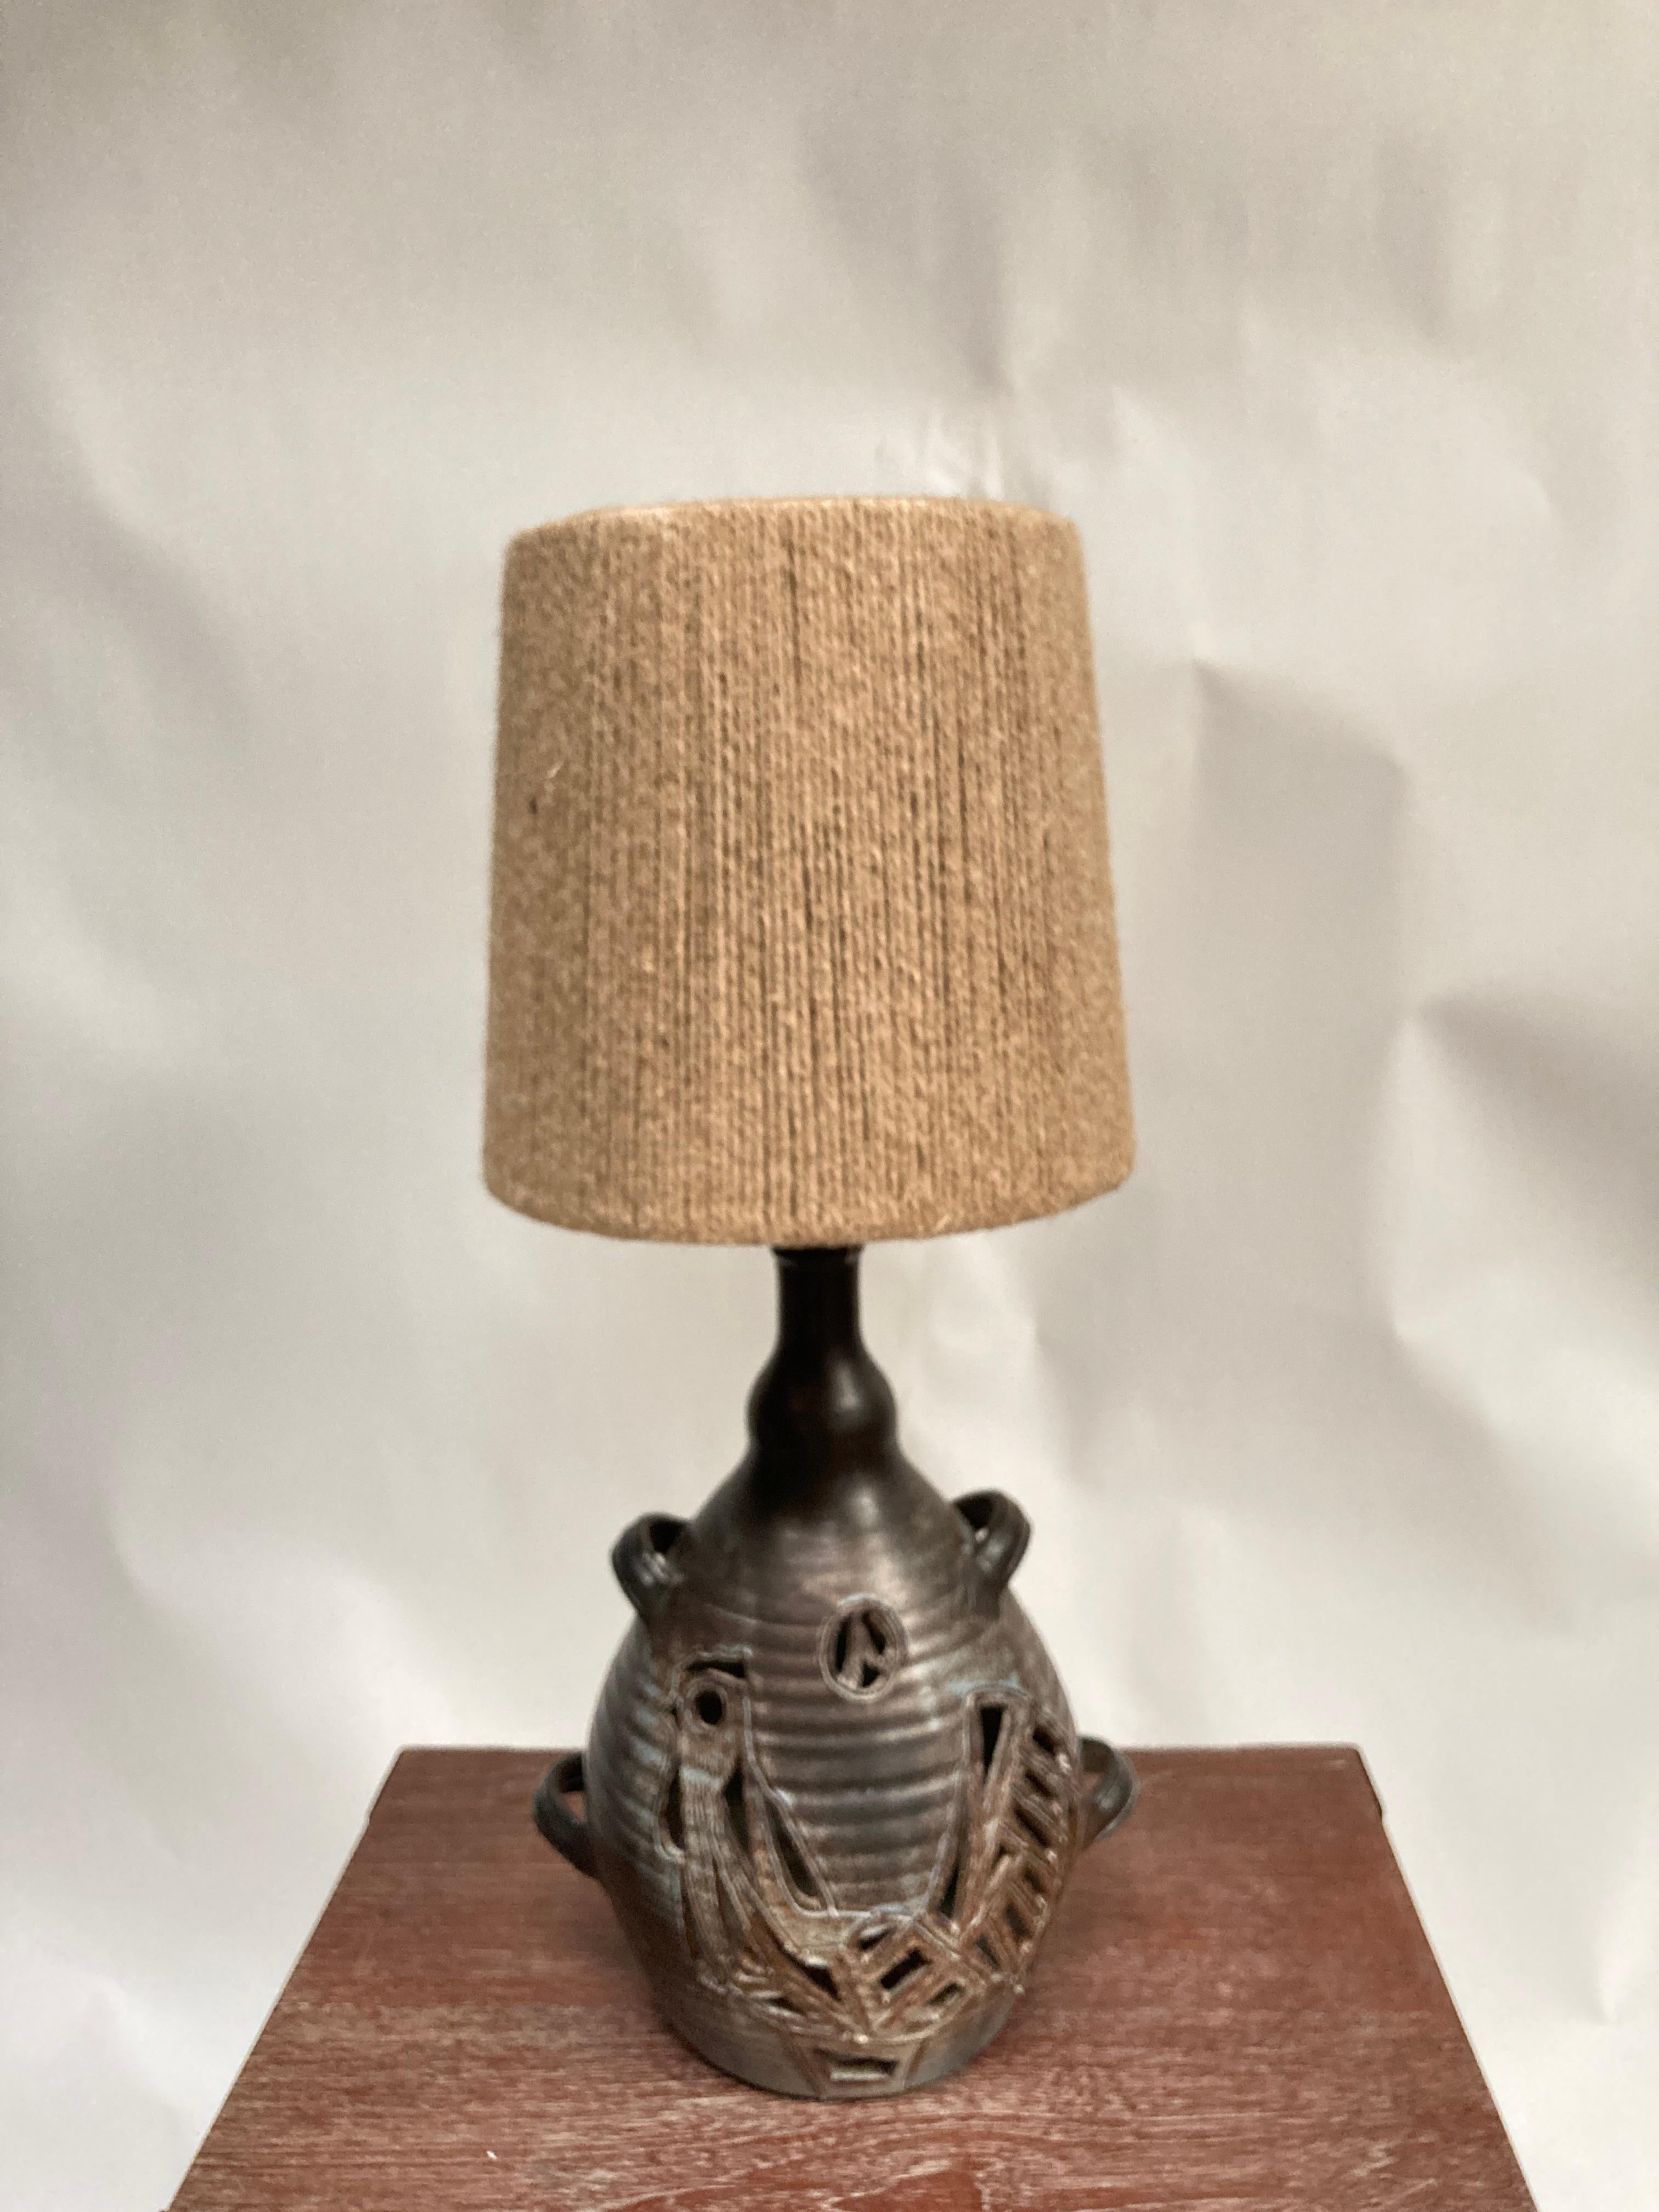 One of a kind ceramic lamp signed Le vieux Chêne Dieulefit
 South of France
Dimensions given without shade
No shade included
One light inside, one light outside